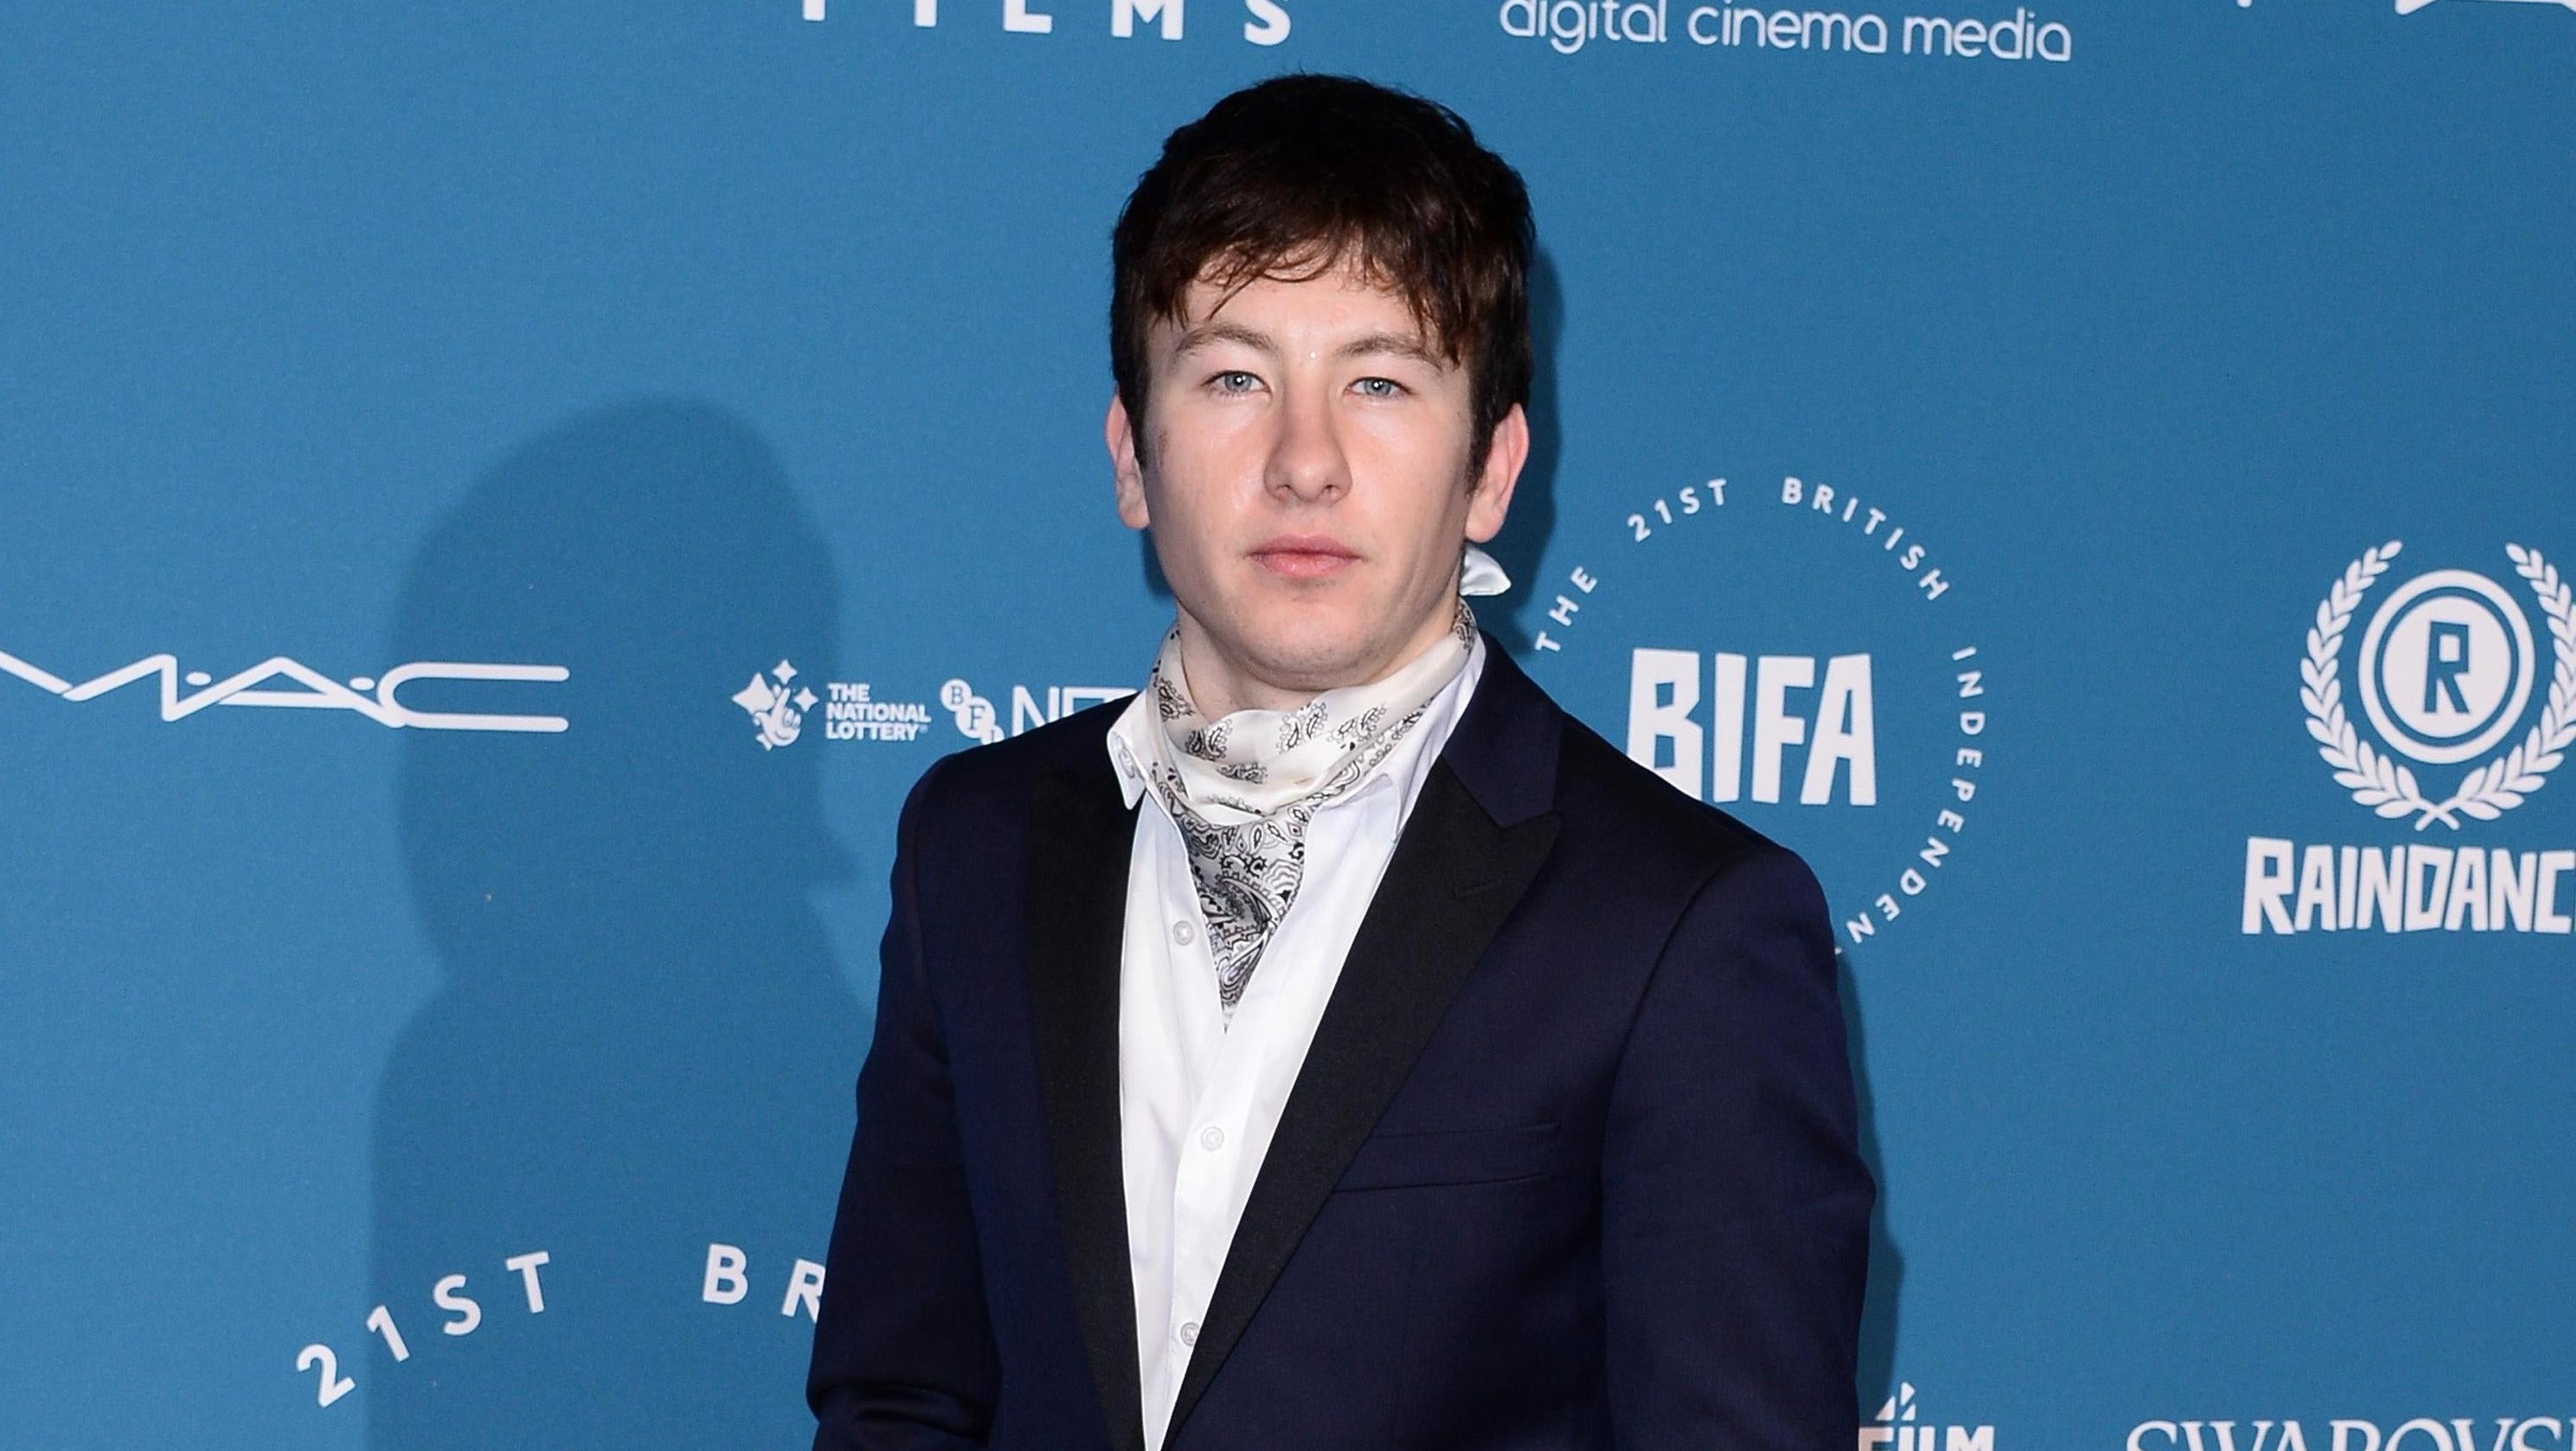 Eternals star Barry Keoghan reportedly hospitalized and left with “serious facial injuries” after assault